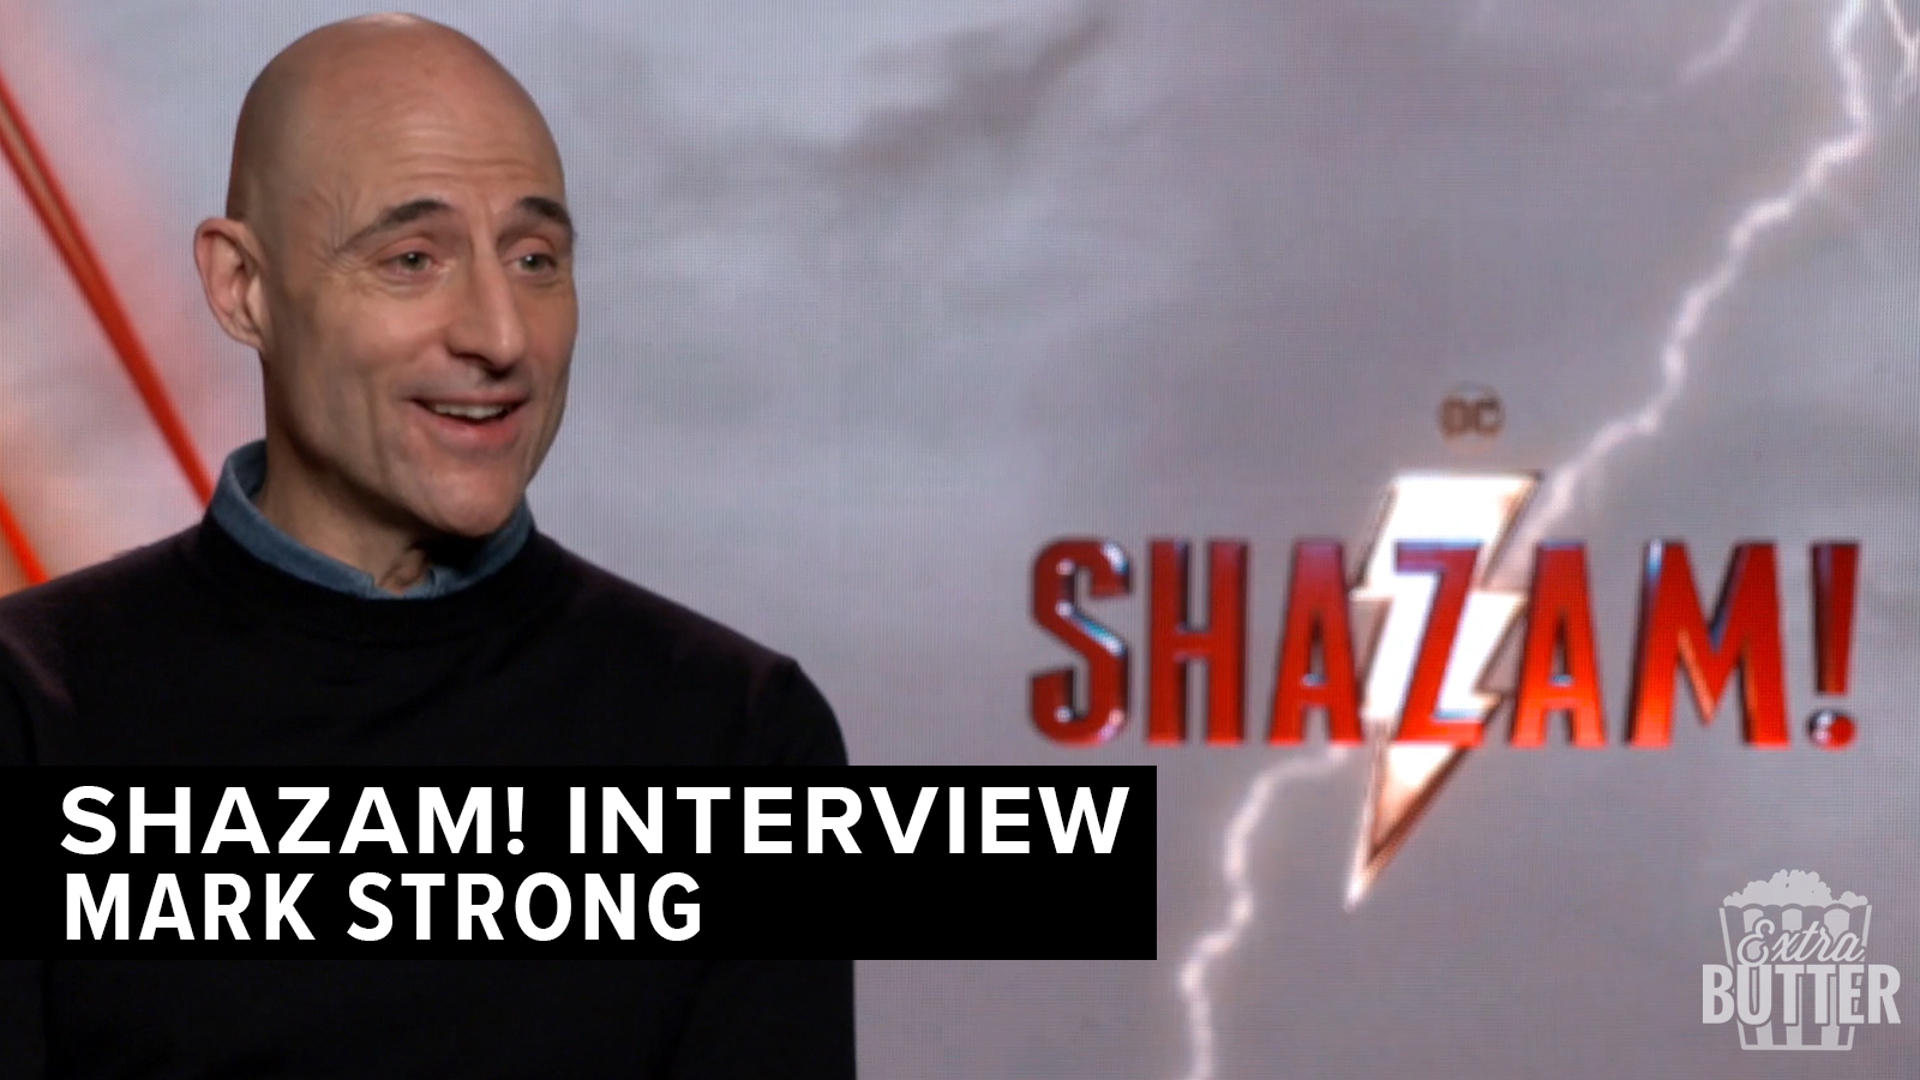 Mark Strong explains why the movie Shazam! is an equal balance of scary and fun. Strong also talks about the fight scenes opposite Zachary Levi and how real they needed to be. Strong plays the villain Dr. Sivana in Shazam!, the latest film in the DC Extended Universe. Interview arranged by Warner Bros. Pictures.